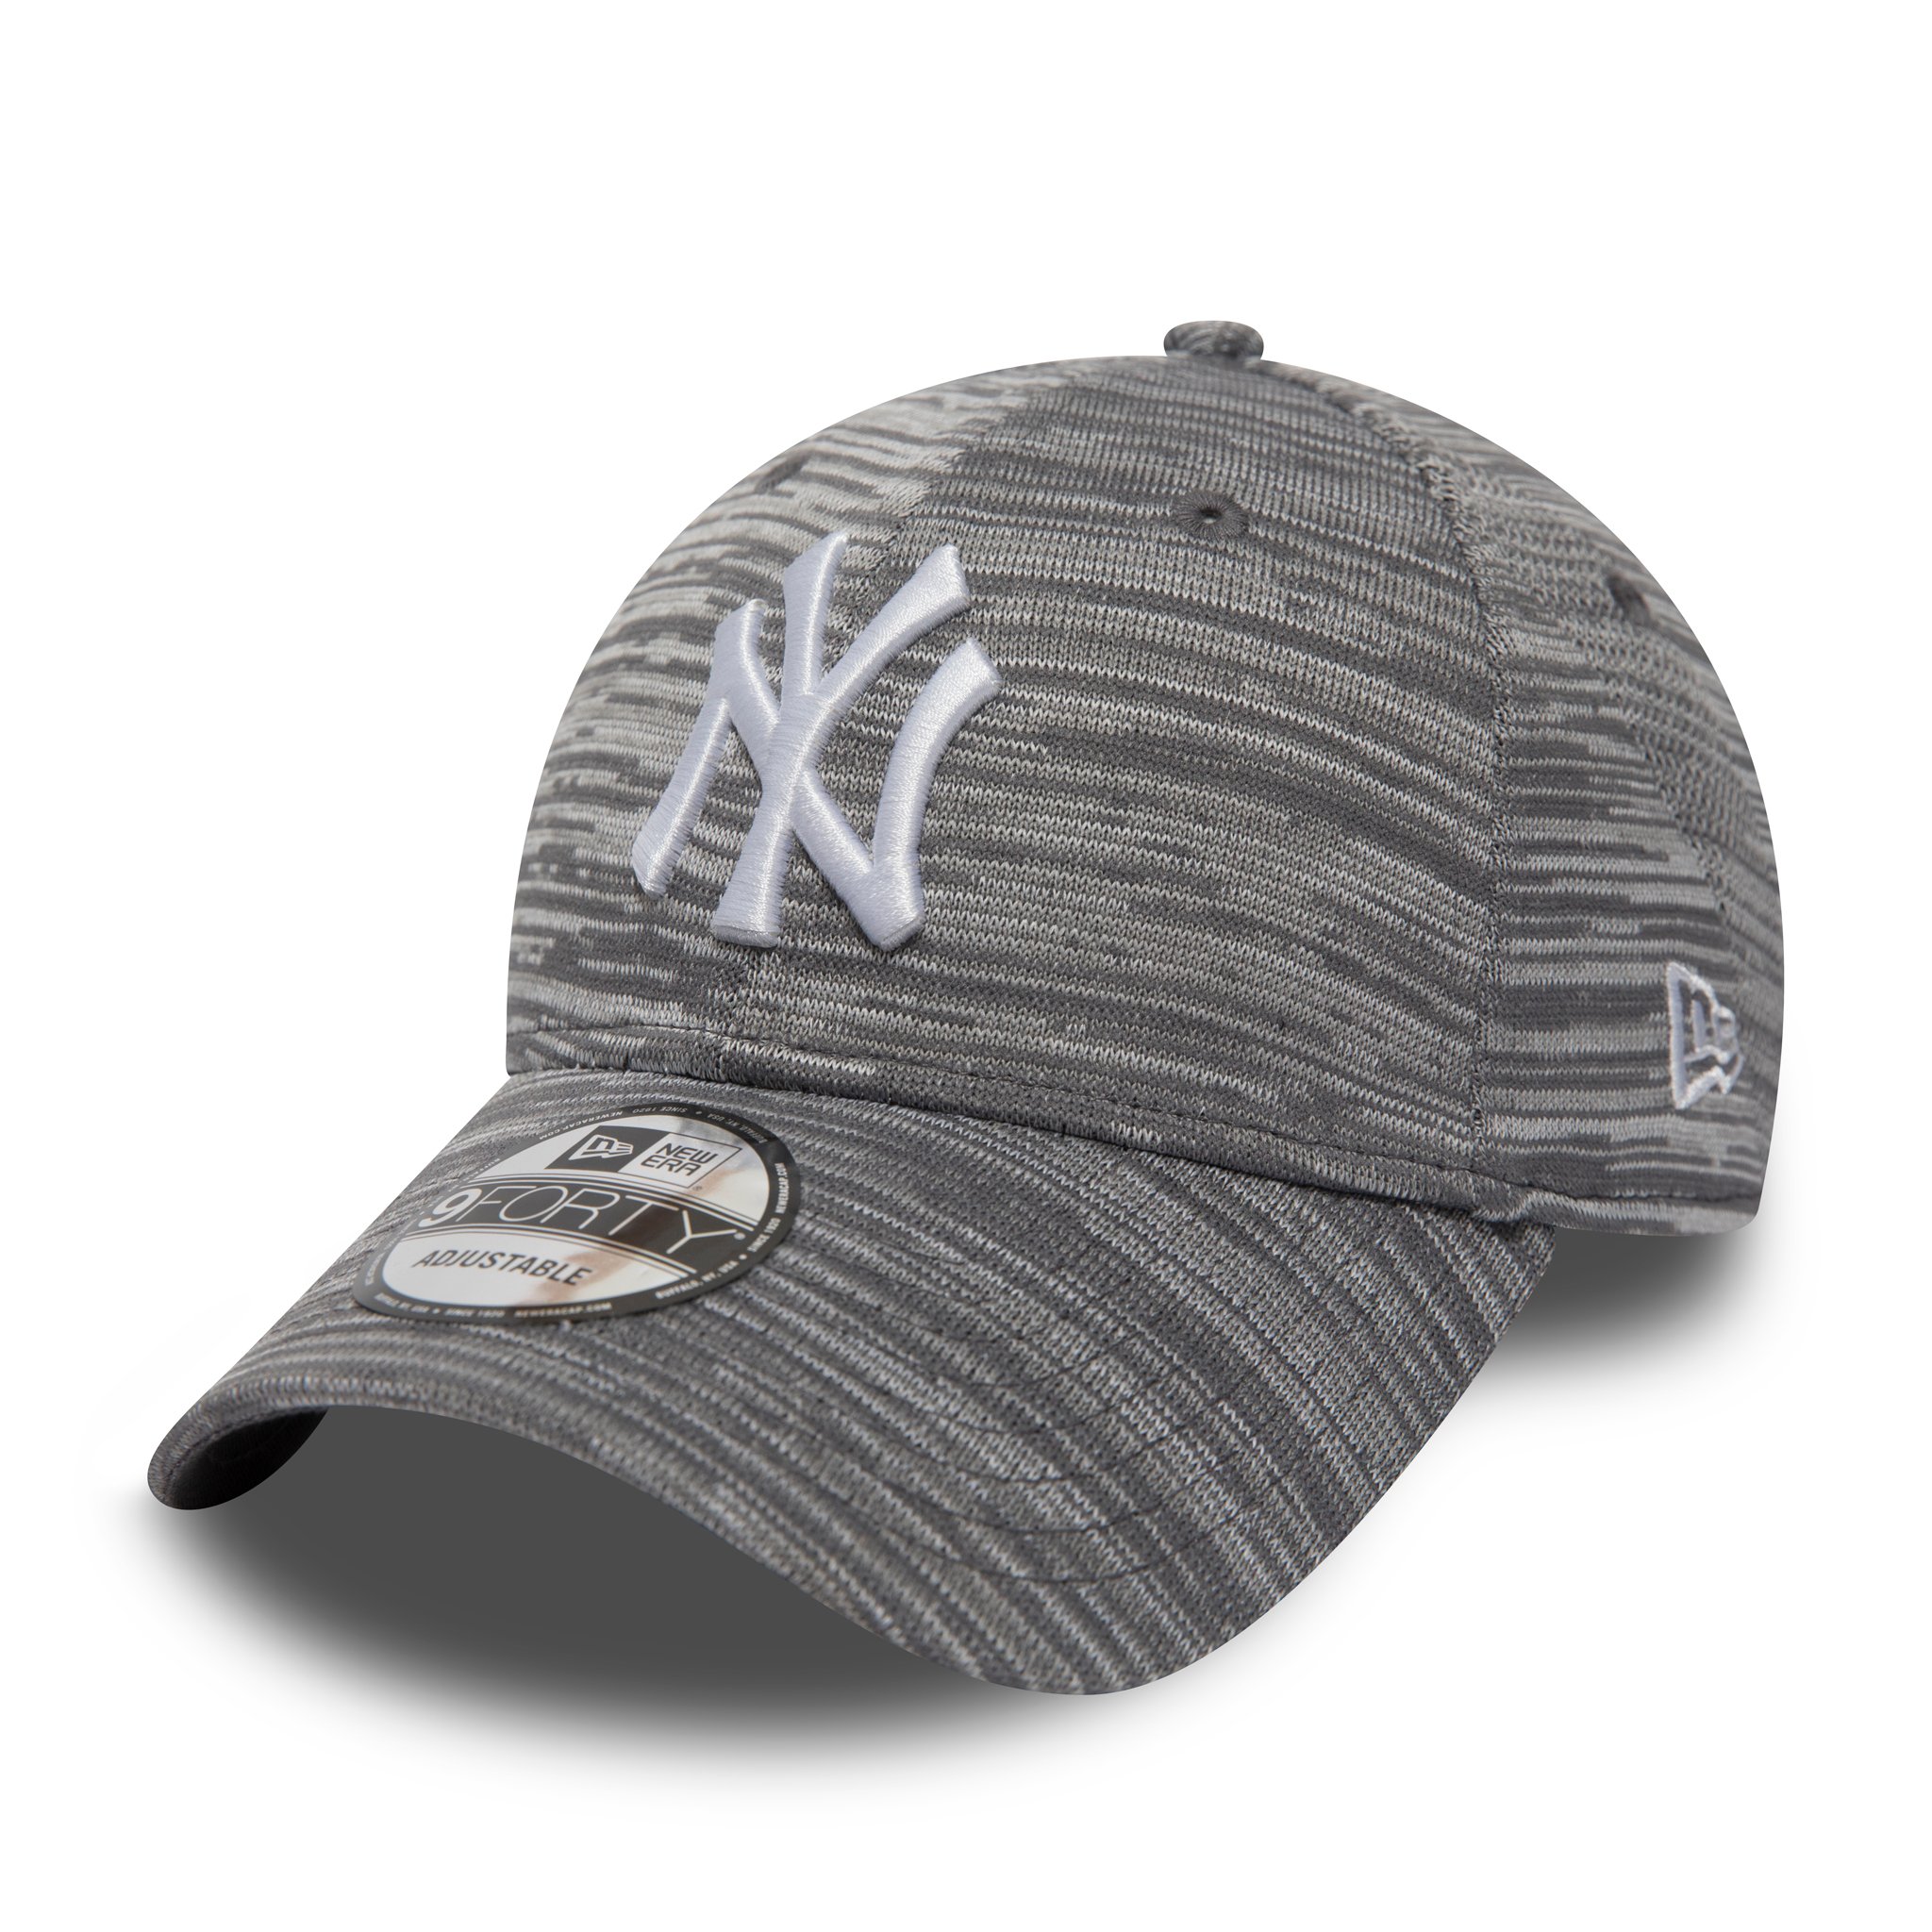 Cappellino 9FORTY Engineered Fit New York Yankees grigio